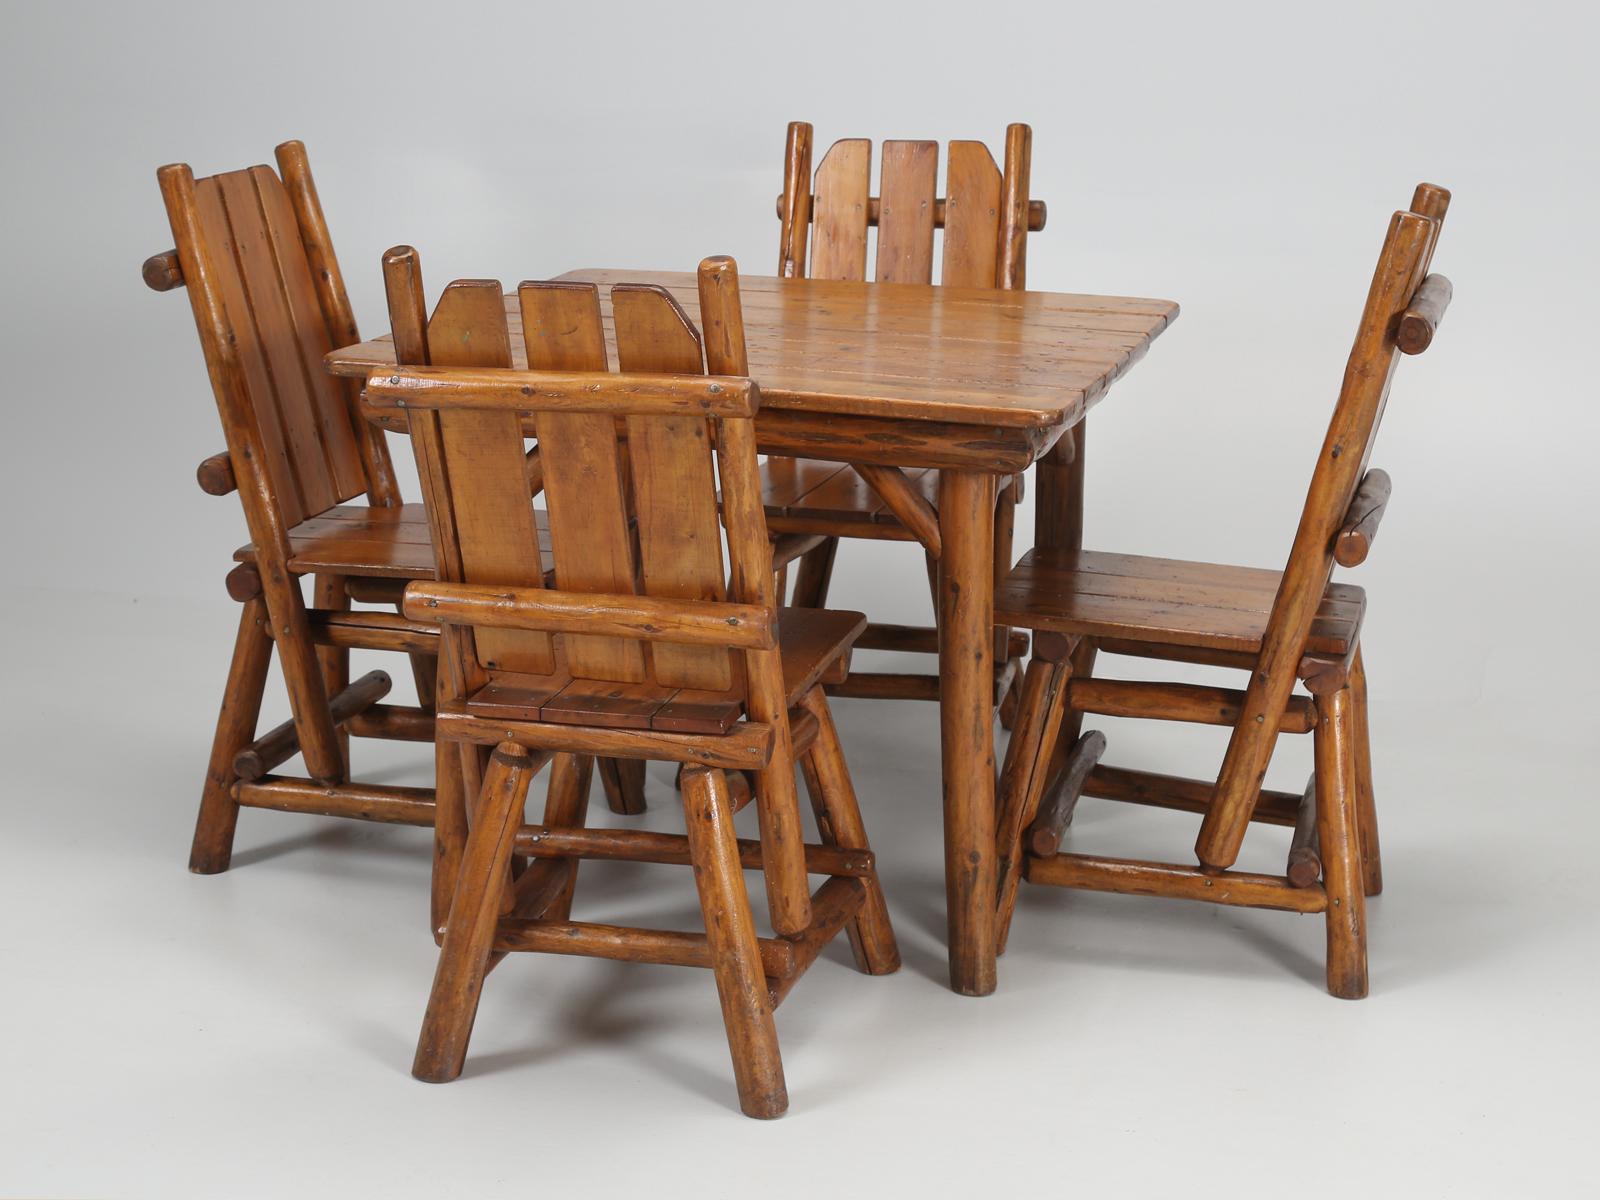 Not only is this Rustic American furniture great looking, but it also happens to be very comfortable without seat cushions. Typically, when we find old rustic mountain cabin furniture, it has been well used and is in need of immediate surgery, and